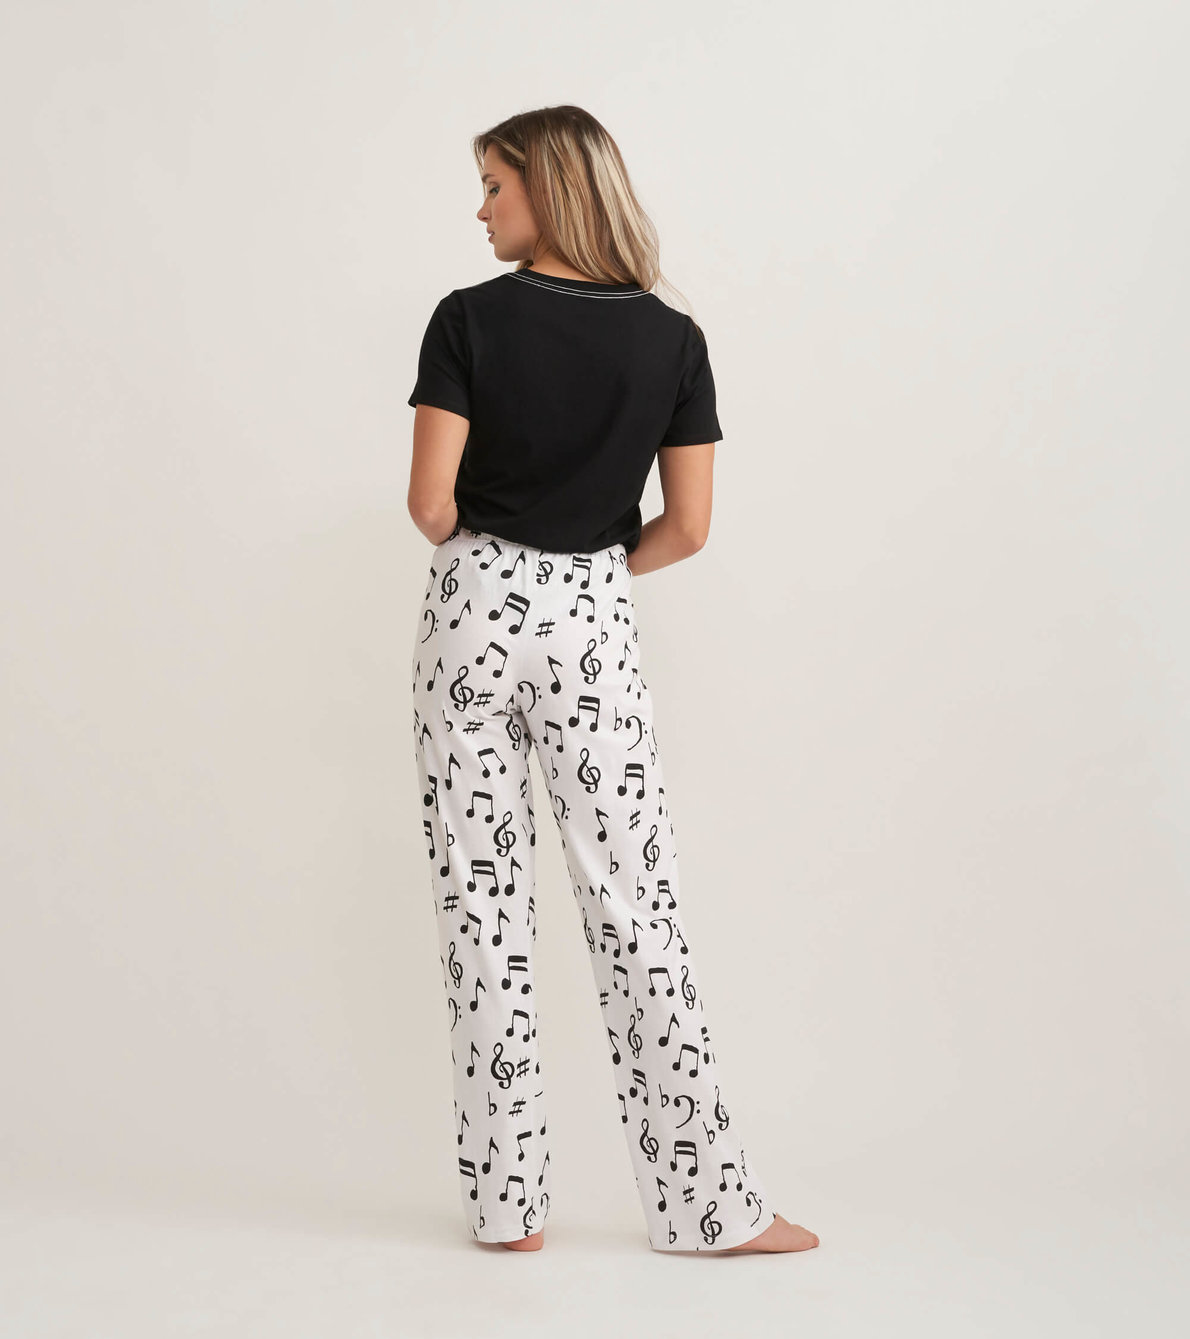 View larger image of Treble Maker Women's Tee and Pants Pajama Separates